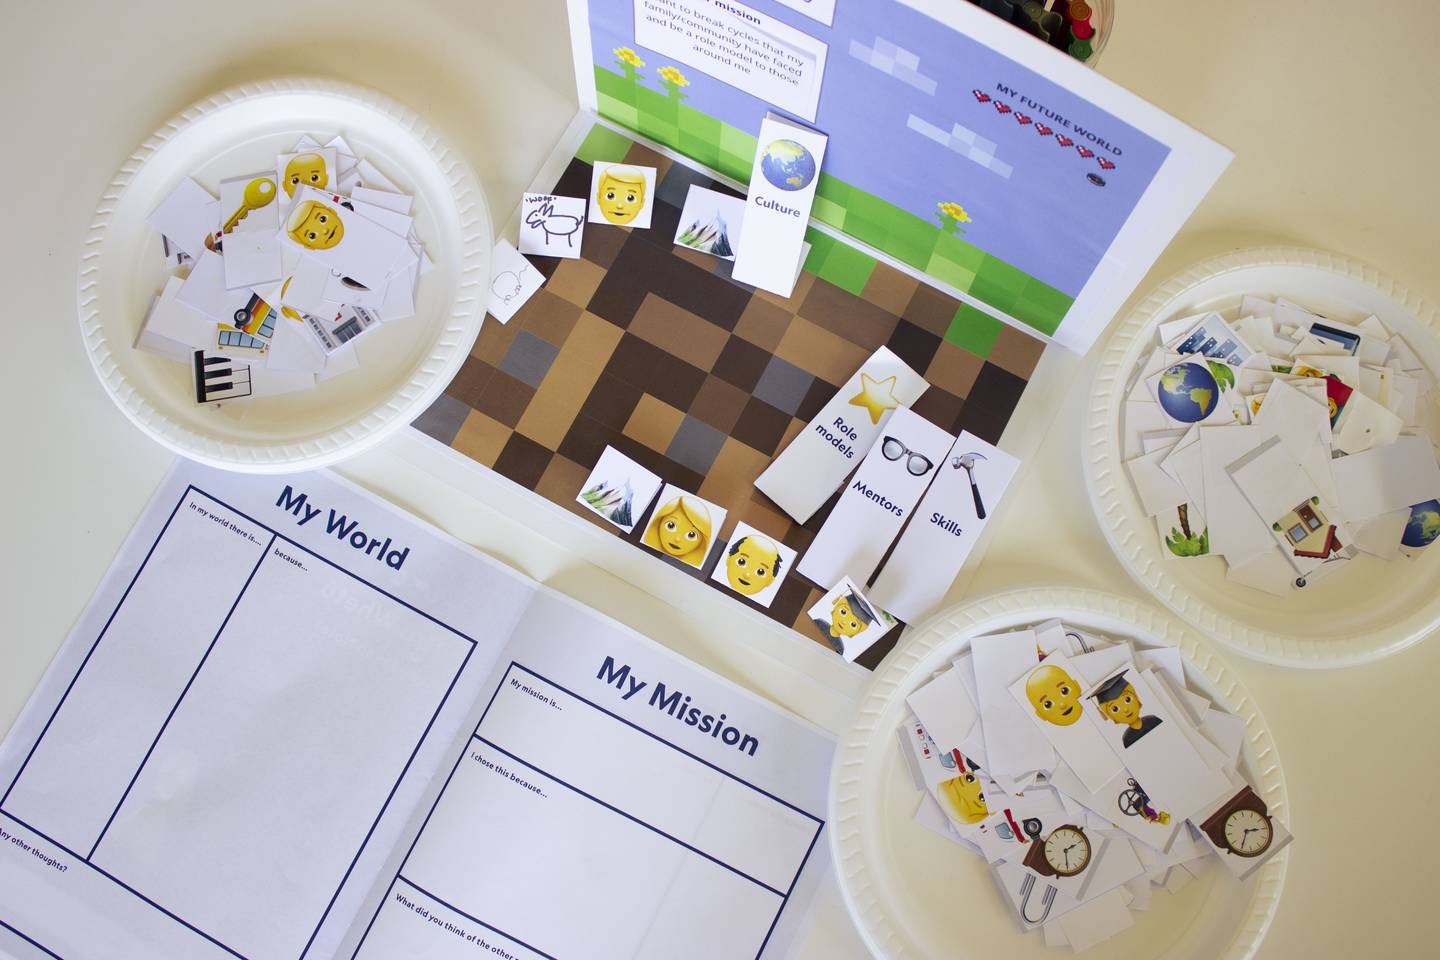 A physical prototyping activity with emoji print outs and a missions and world view table.